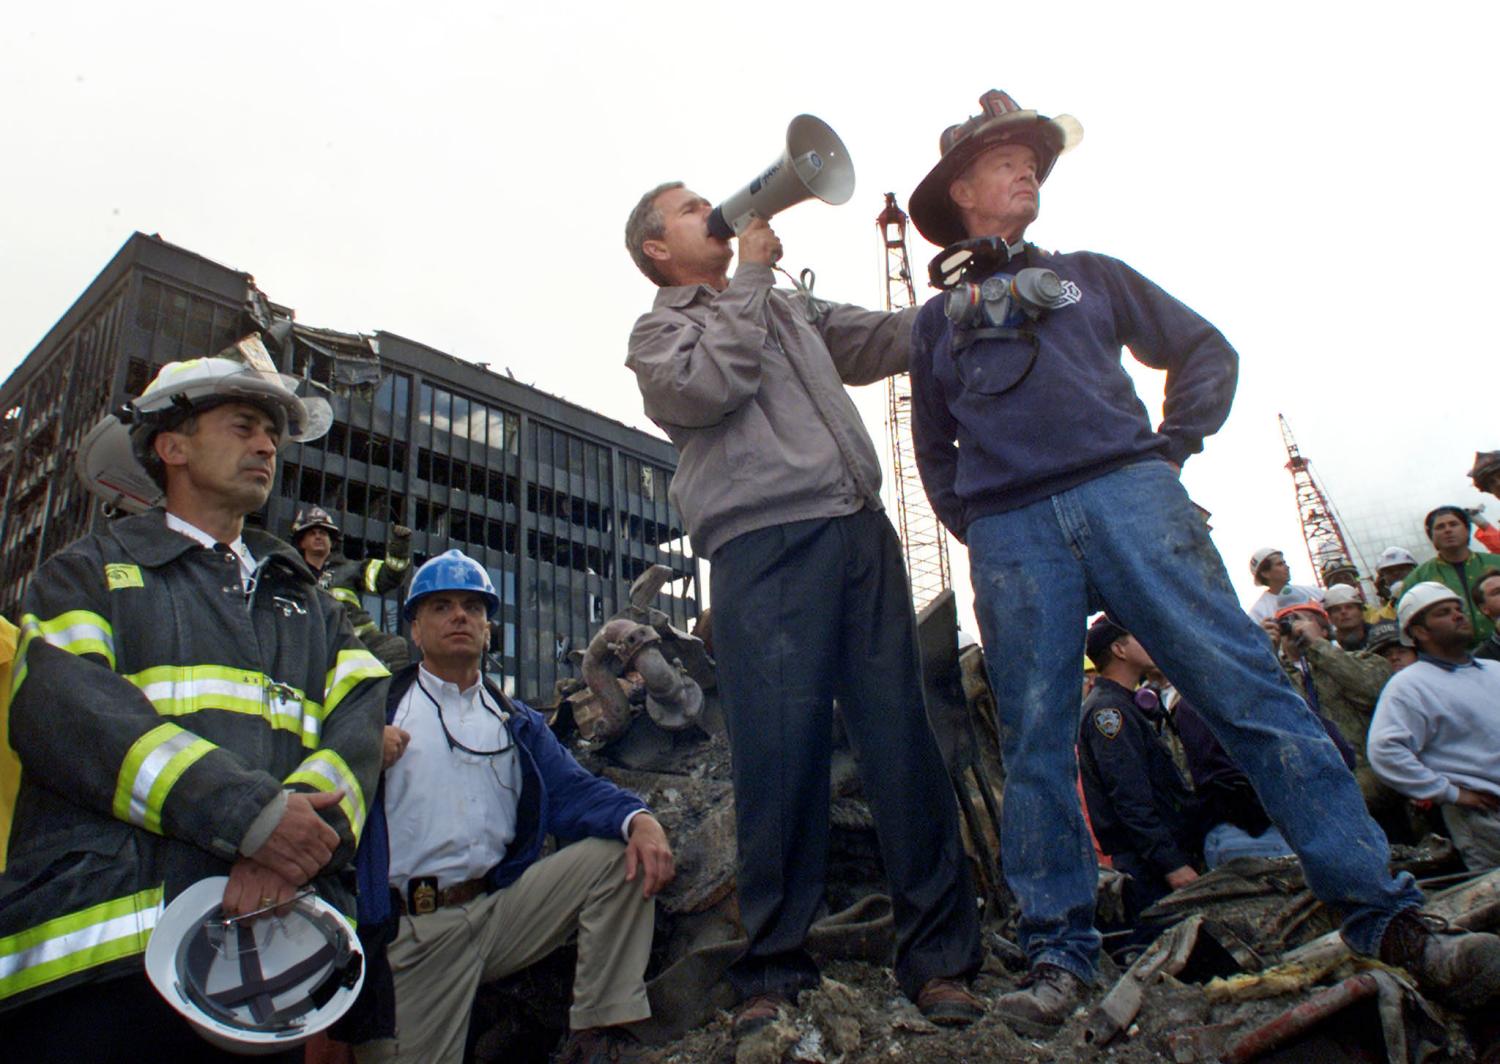 U.S. President George W. Bush addresses a crowd as he stands with retired firefighter Bob Beckwith (R) from Ladder 117 at the scene of the World Trade Center disaster in New York, September 14, 2001. The World Trade Center Towers and 7 World Trade Center were destroyed after both the landmark towers were struck by two hijacked planes in a terror attack on September 11. REUTERS/Win McNamee SB/SV - RTRMRTX